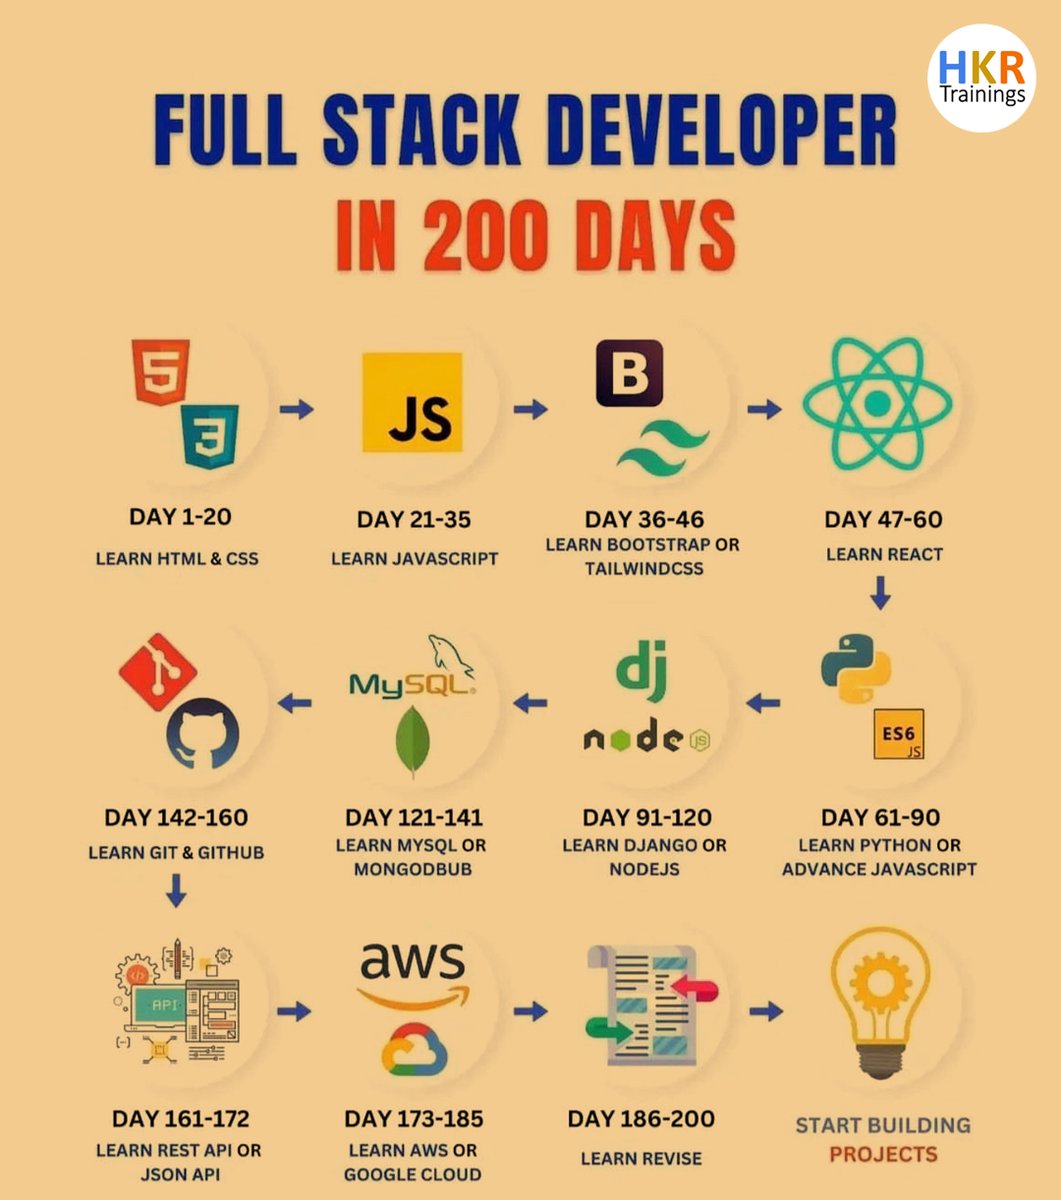 👨‍💻 Become a Full Stack Developer in just 200 days! 🚀 Join our program and master front-end and back-end development from scratch.💻
#FullStackDeveloper #FullStack #HKRTrainings #Developer #Coding #Programming #Technology #TechCareer #CodingJourney #CareerTransformation